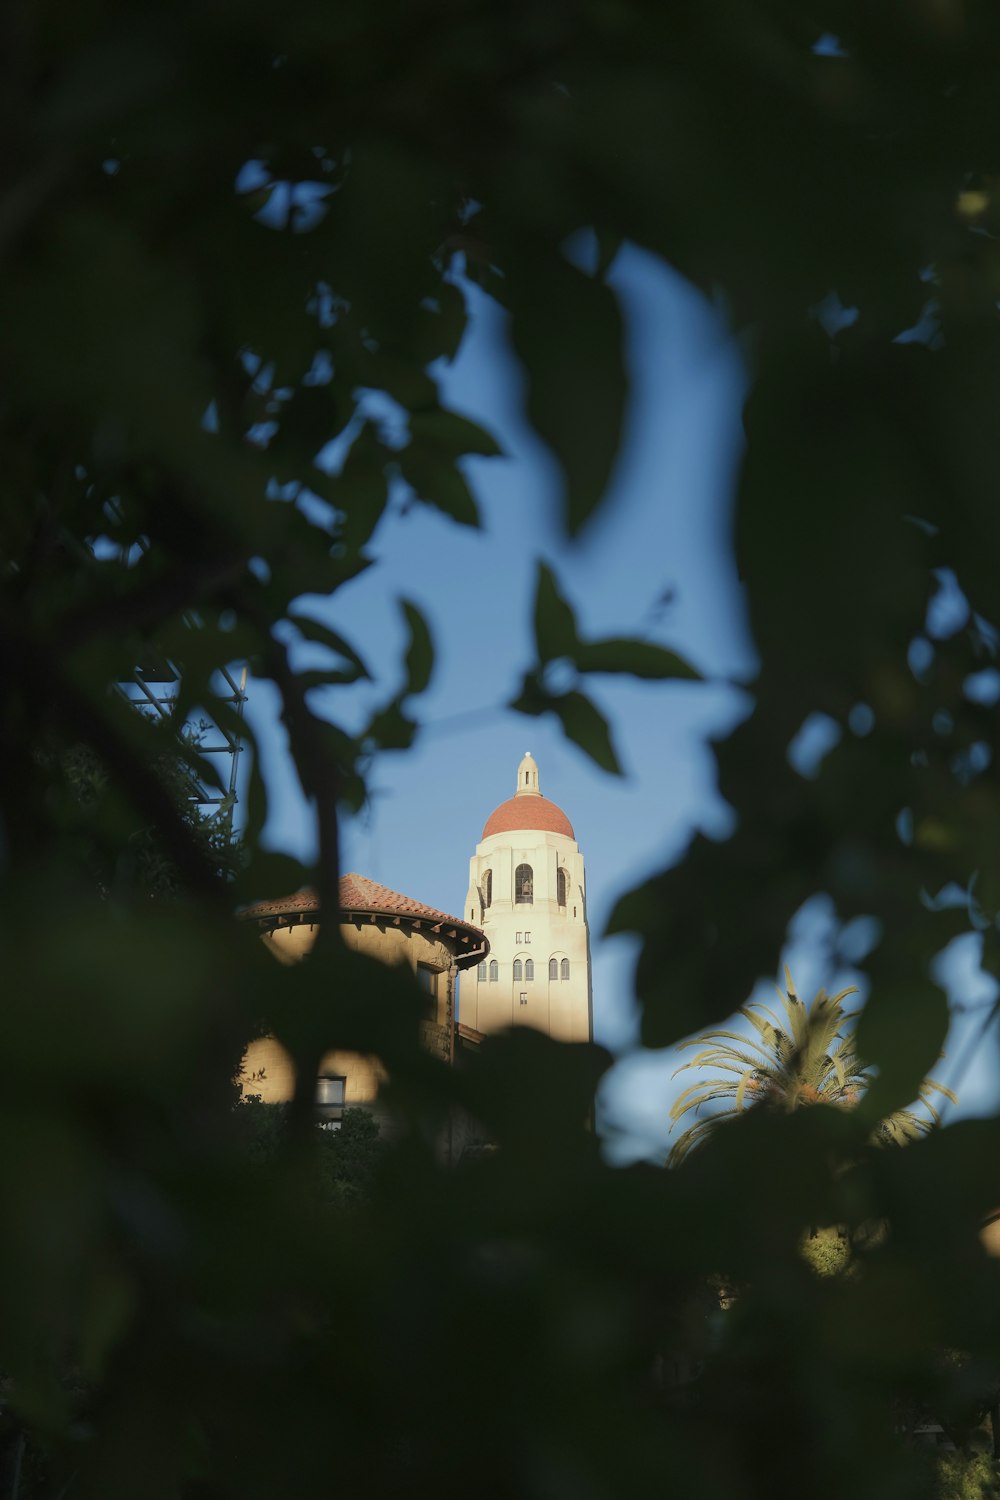 a clock tower seen through the leaves of a tree